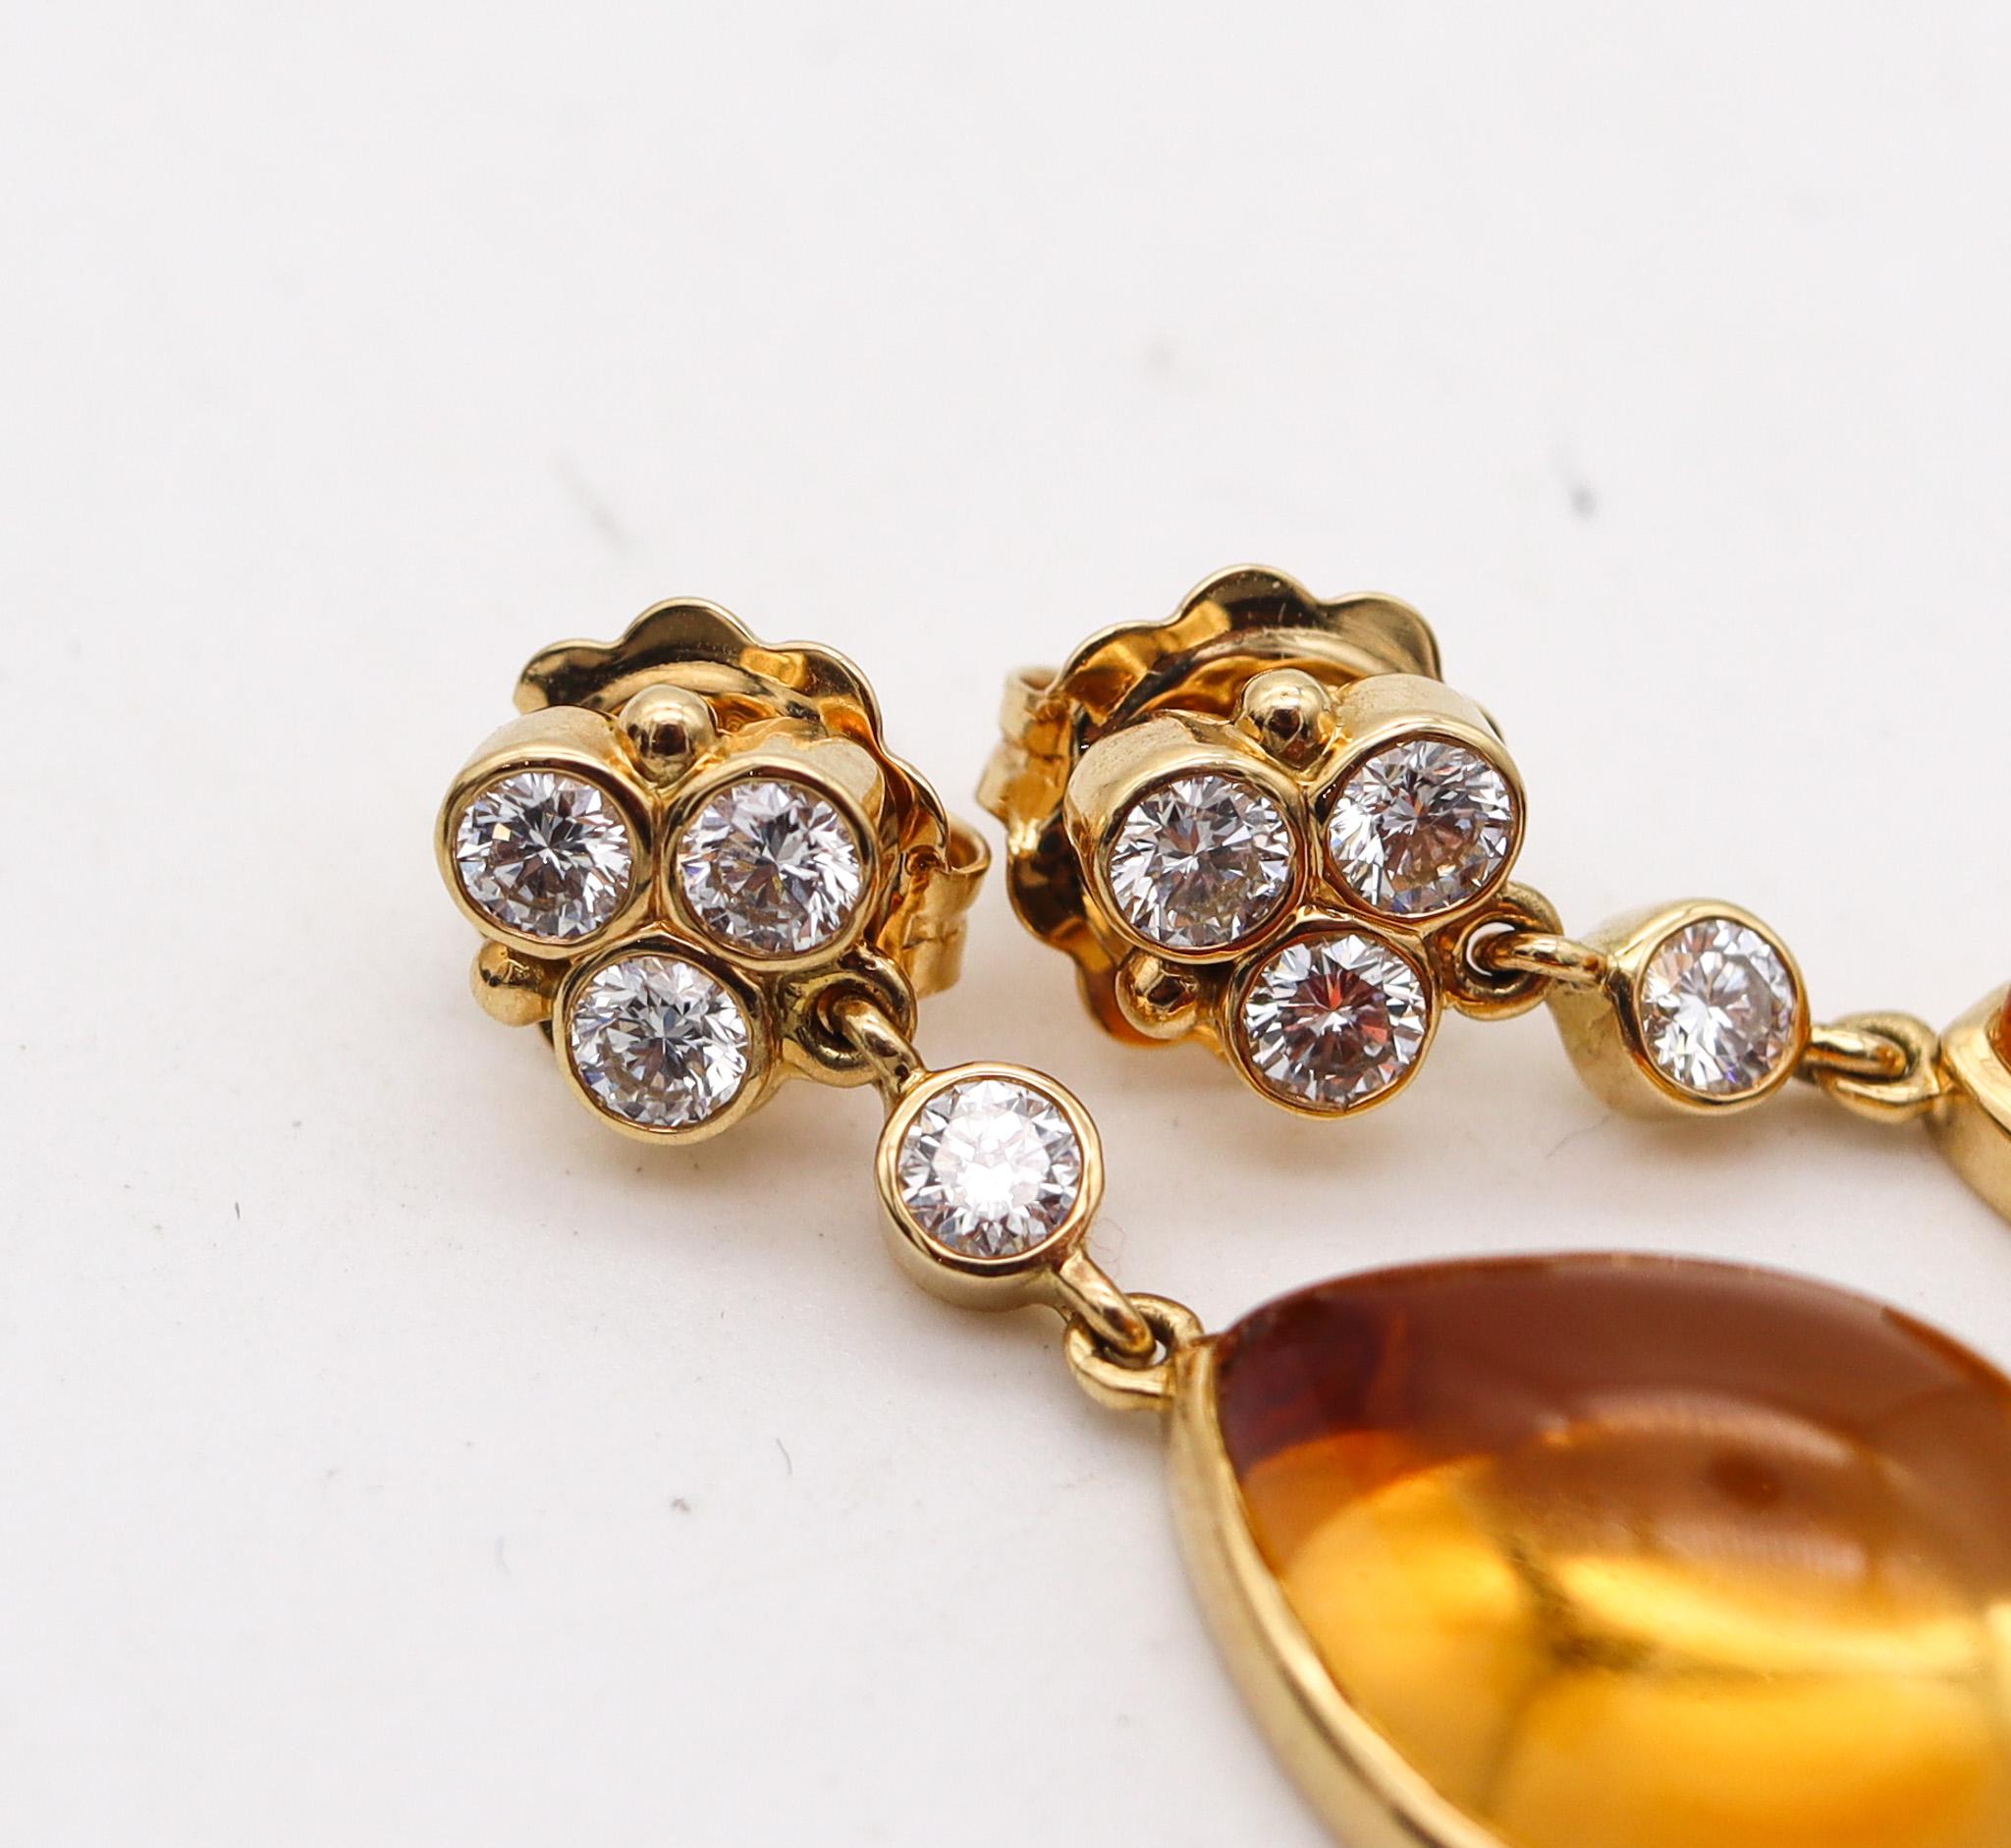 Brilliant Cut Temple St Clair Dangle Earrings In 18Kt Gold With 27.98 Ctw In Diamonds And Gems